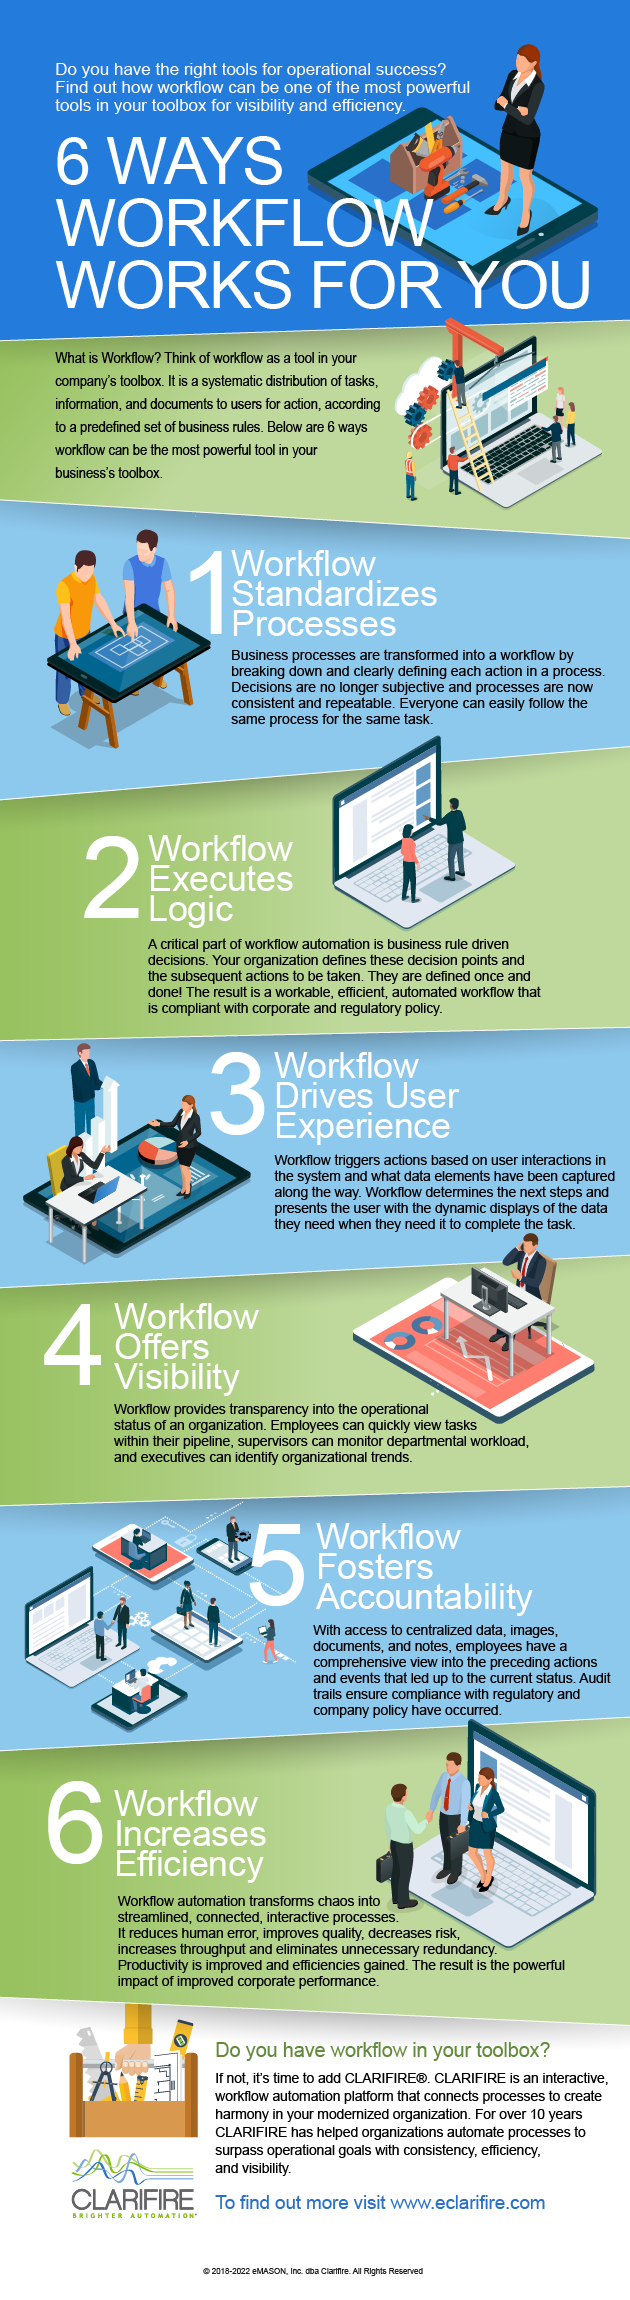 6 Ways Workflow Can Work For You